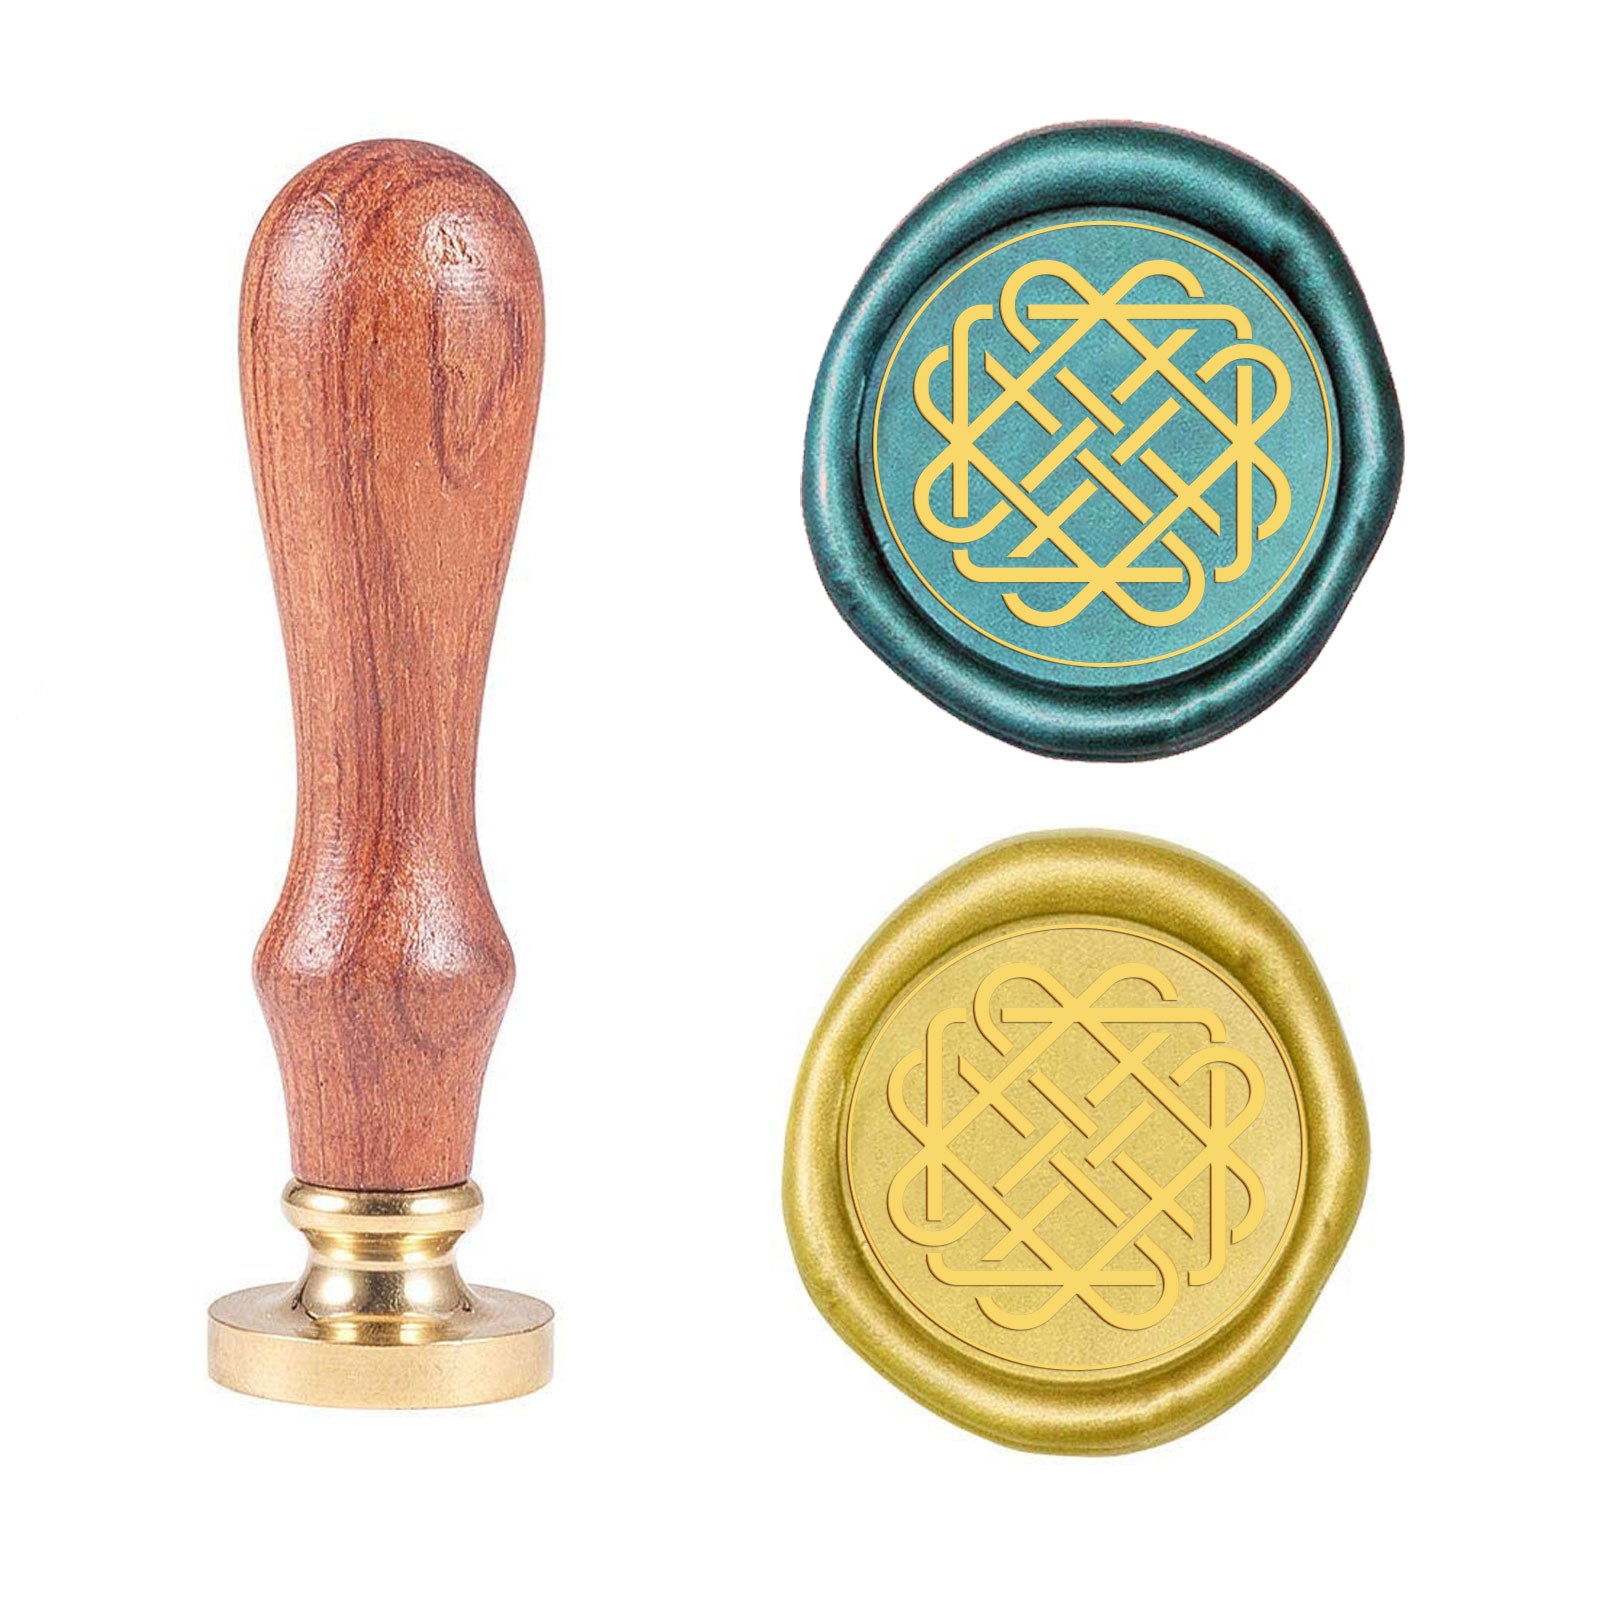 Geometric Chinese Knot Wood Handle Wax Seal Stamp